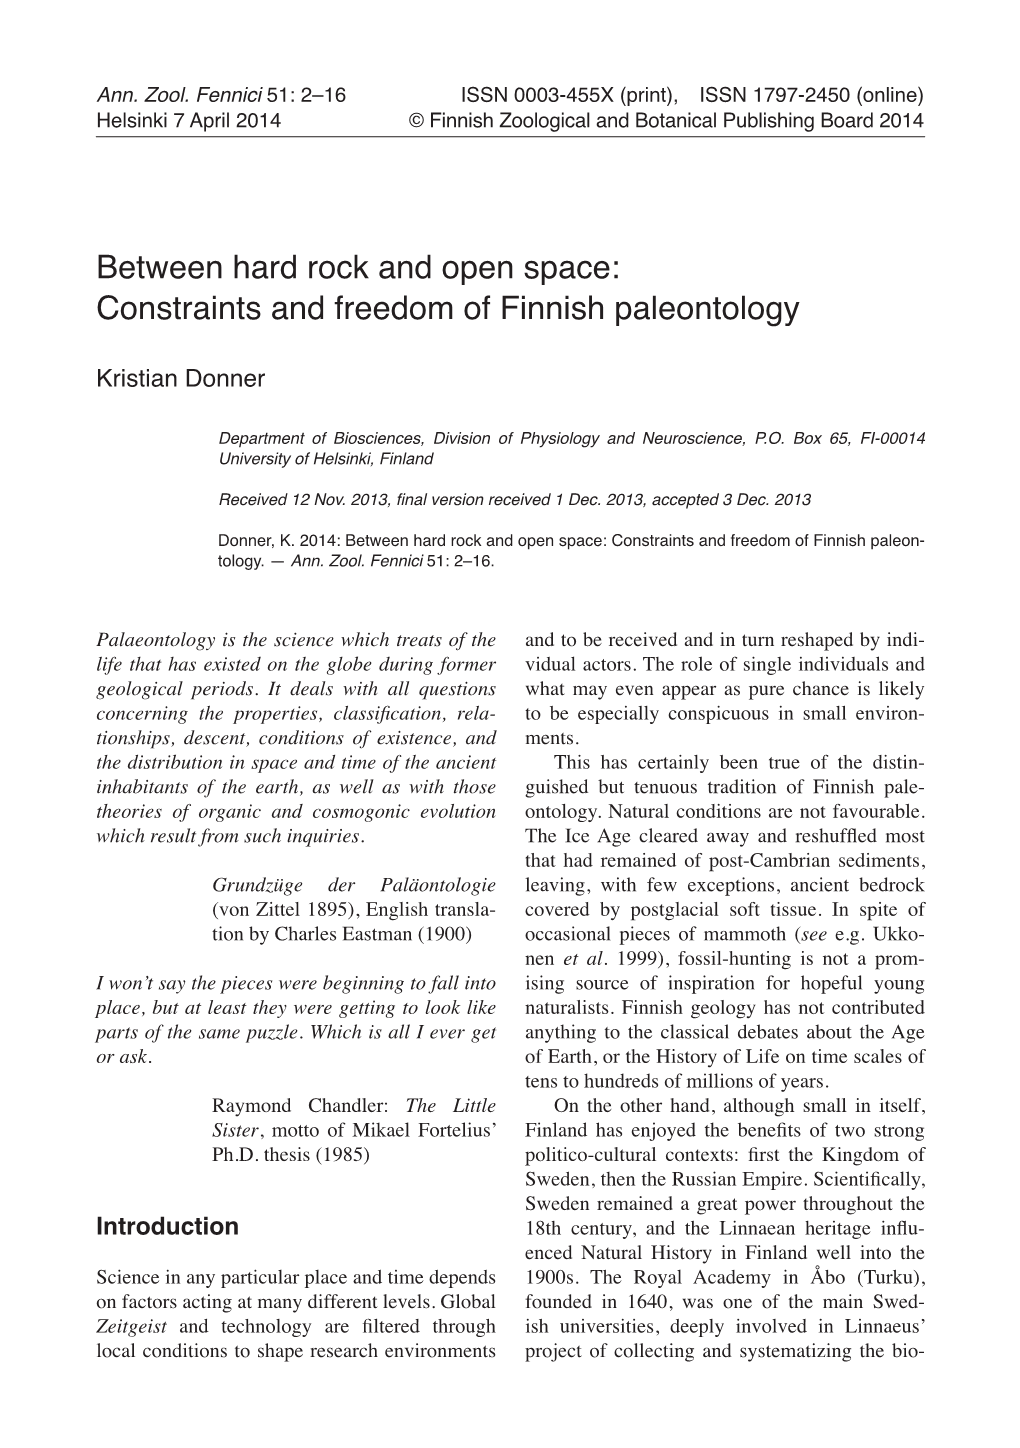 Constraints and Freedom of Finnish Paleontology